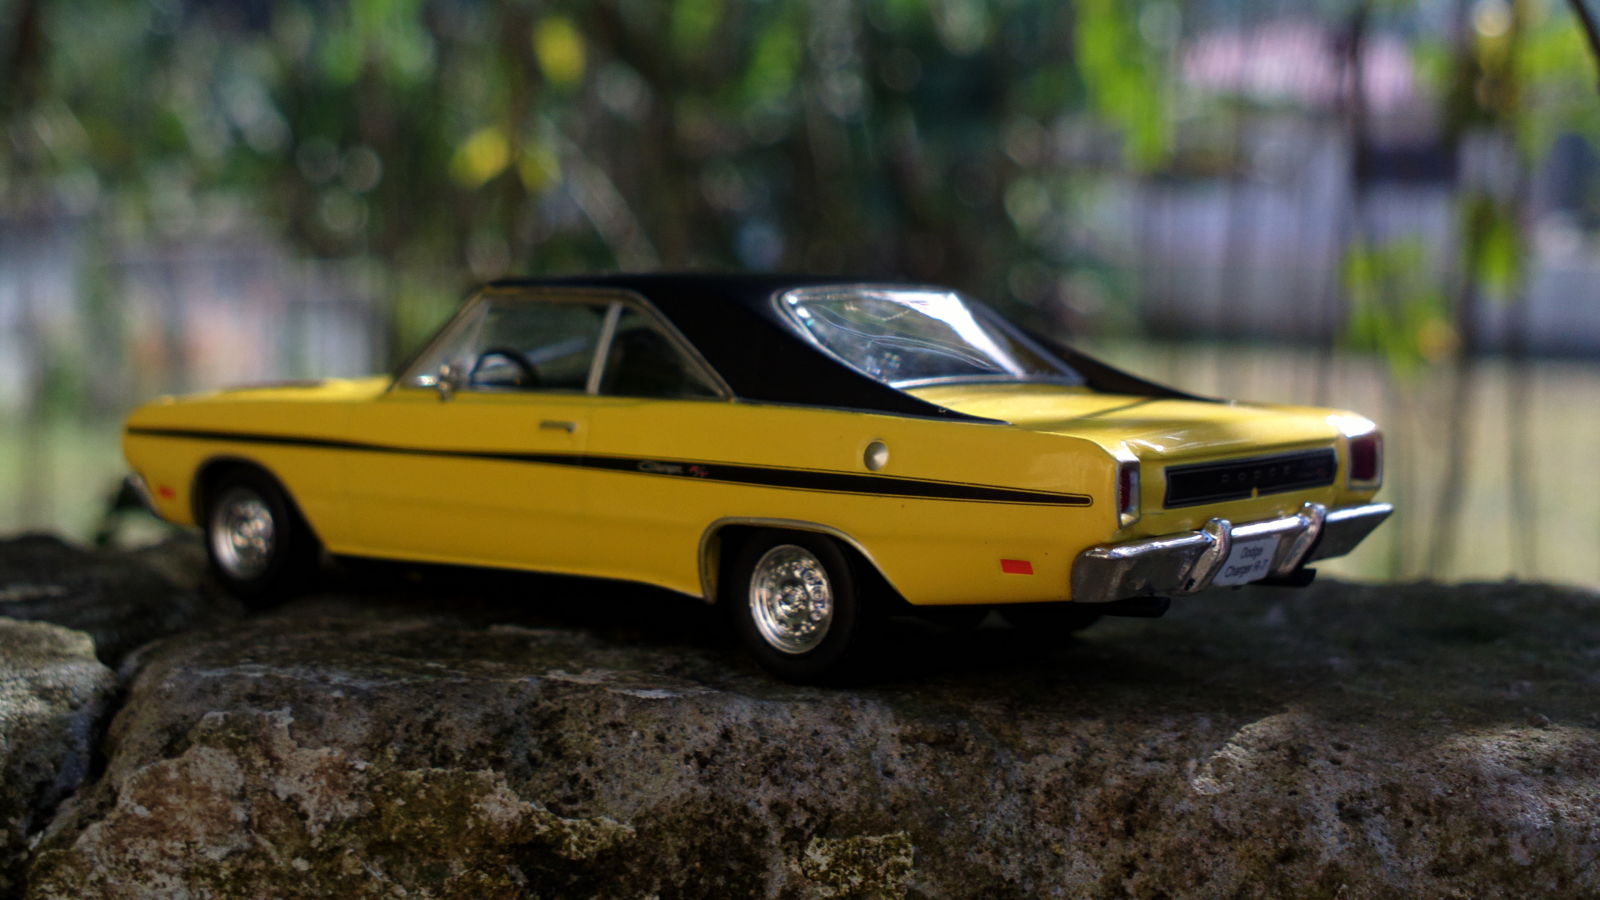 Illustration for article titled Feijoada Friday - 1975 Dodge Charger R/T